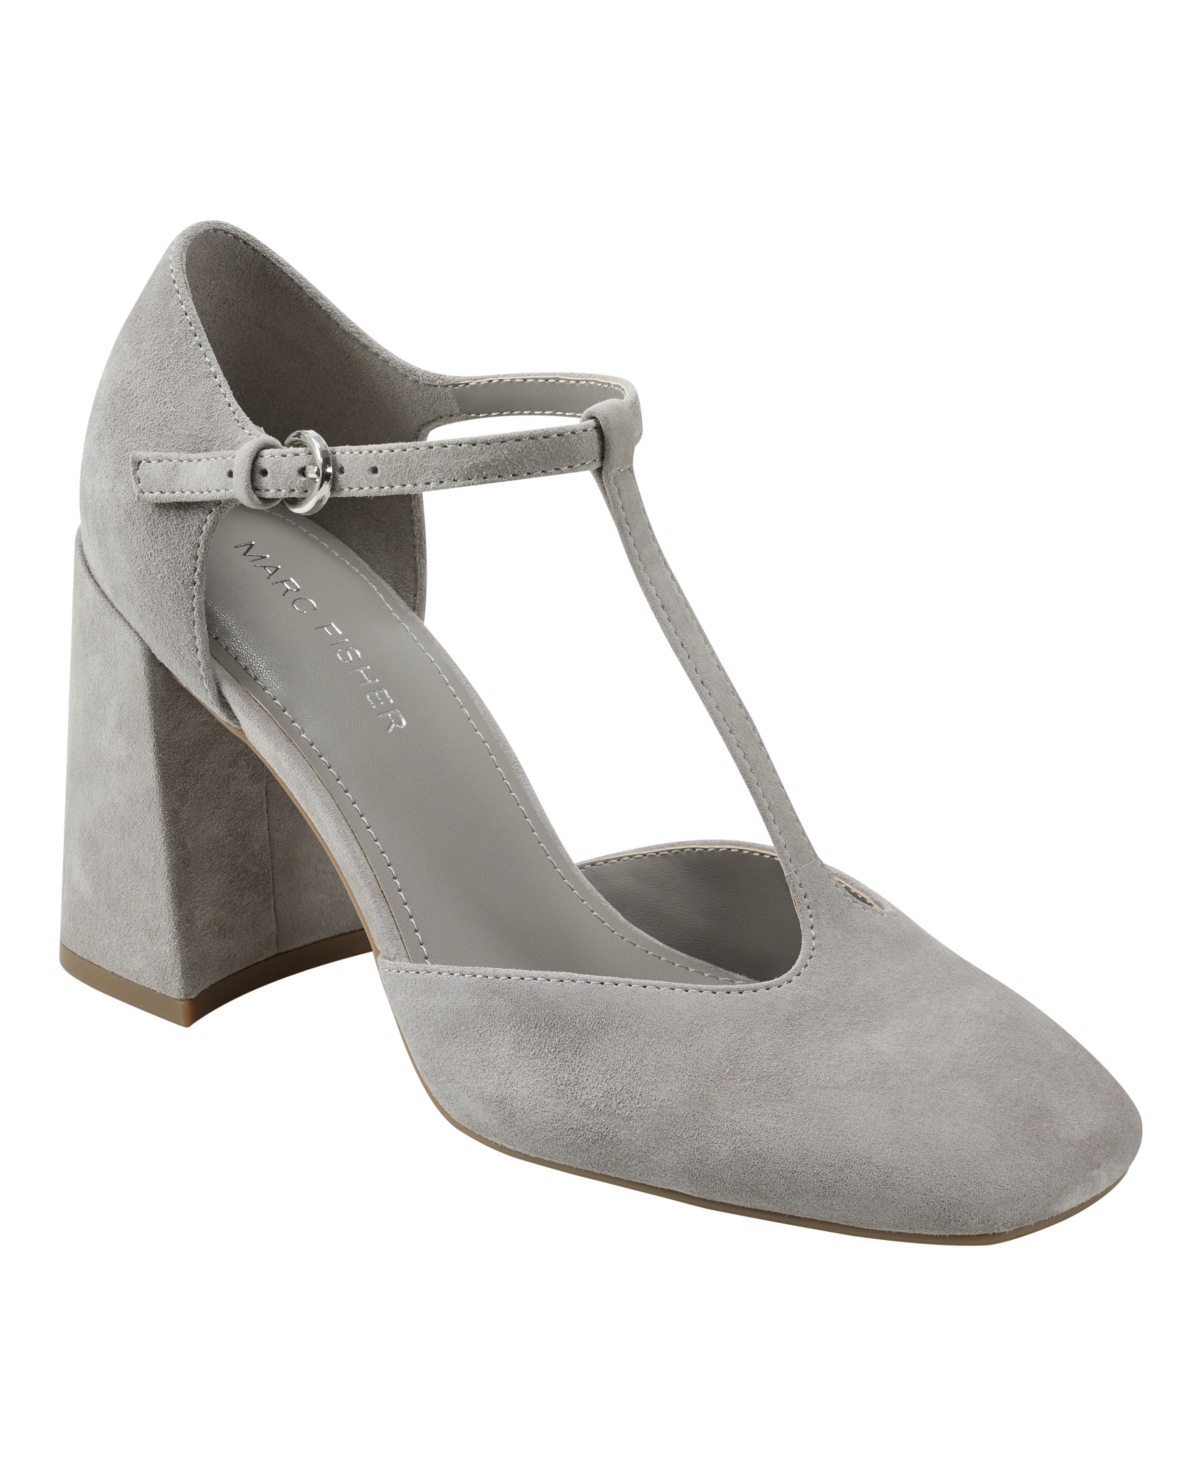 Women's Cyrene Tapered Block Heel Dress Pumps - Taupe Leather